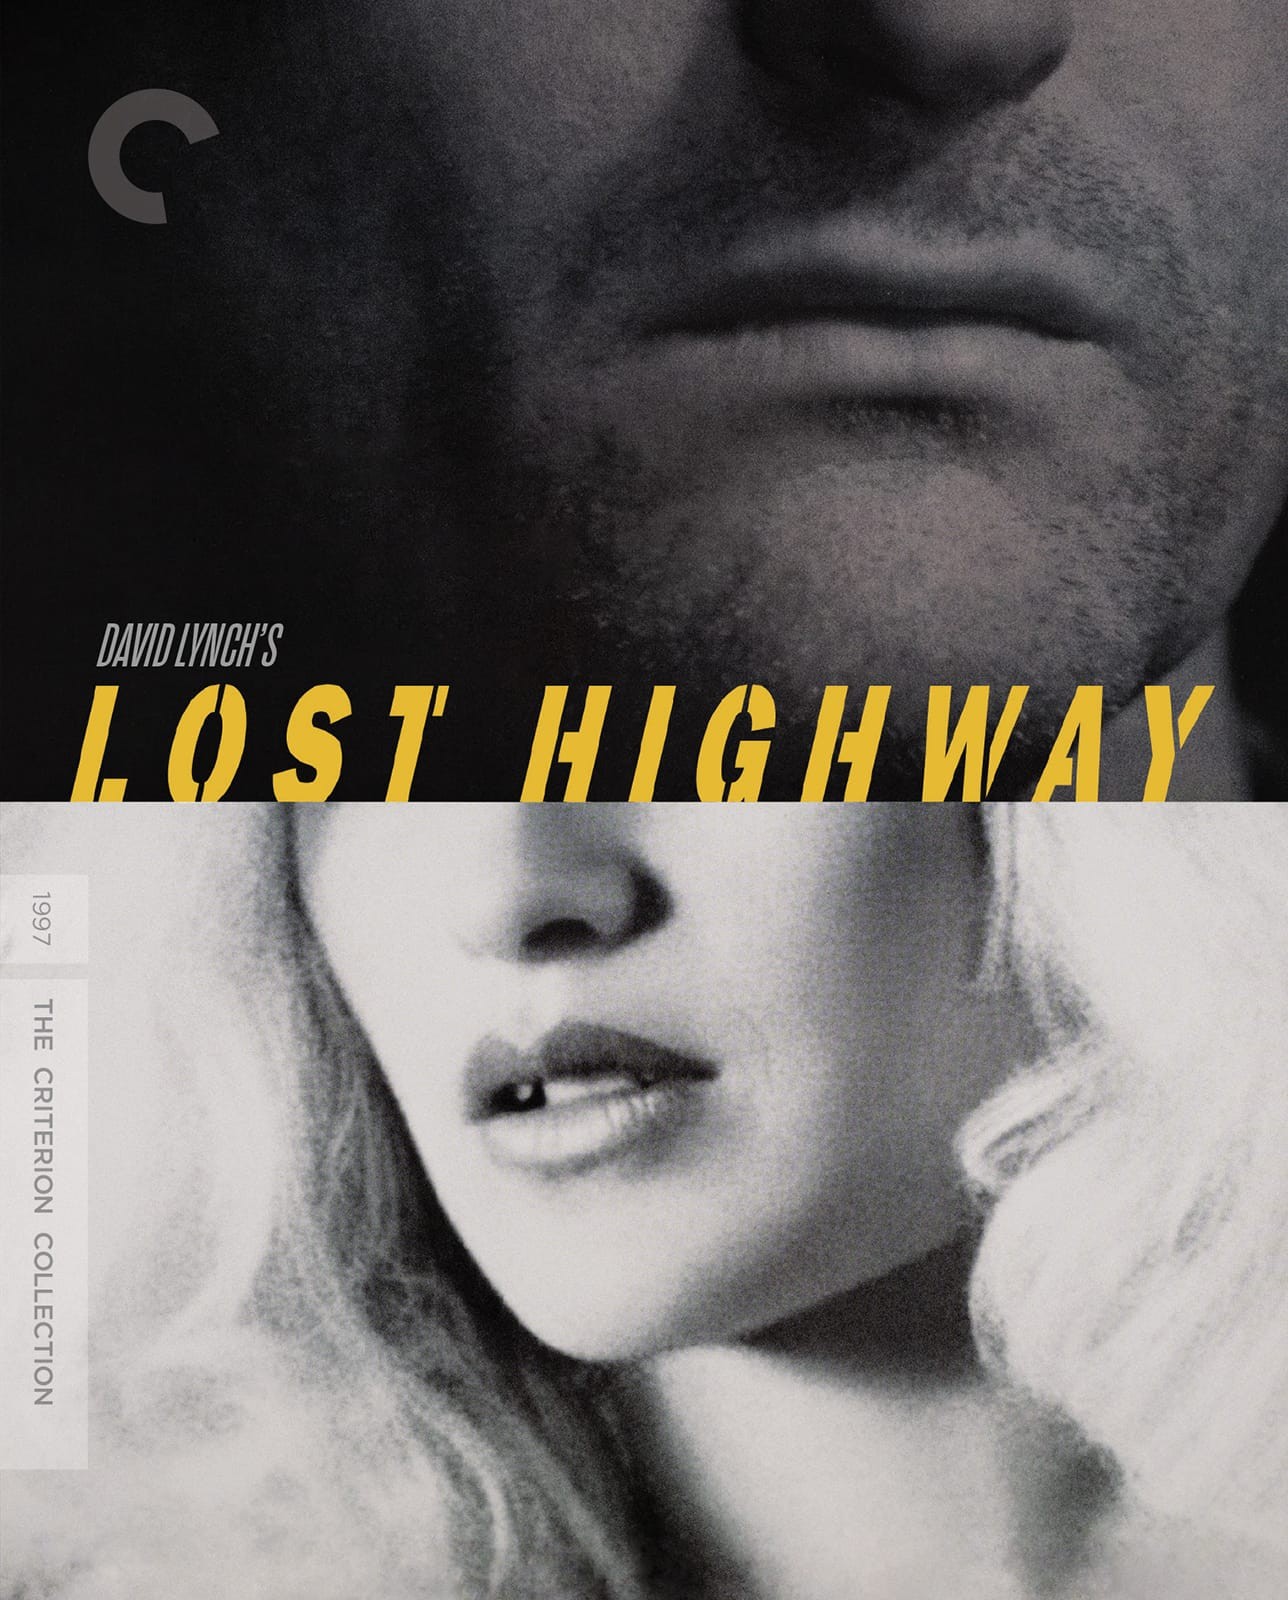 LostHighway